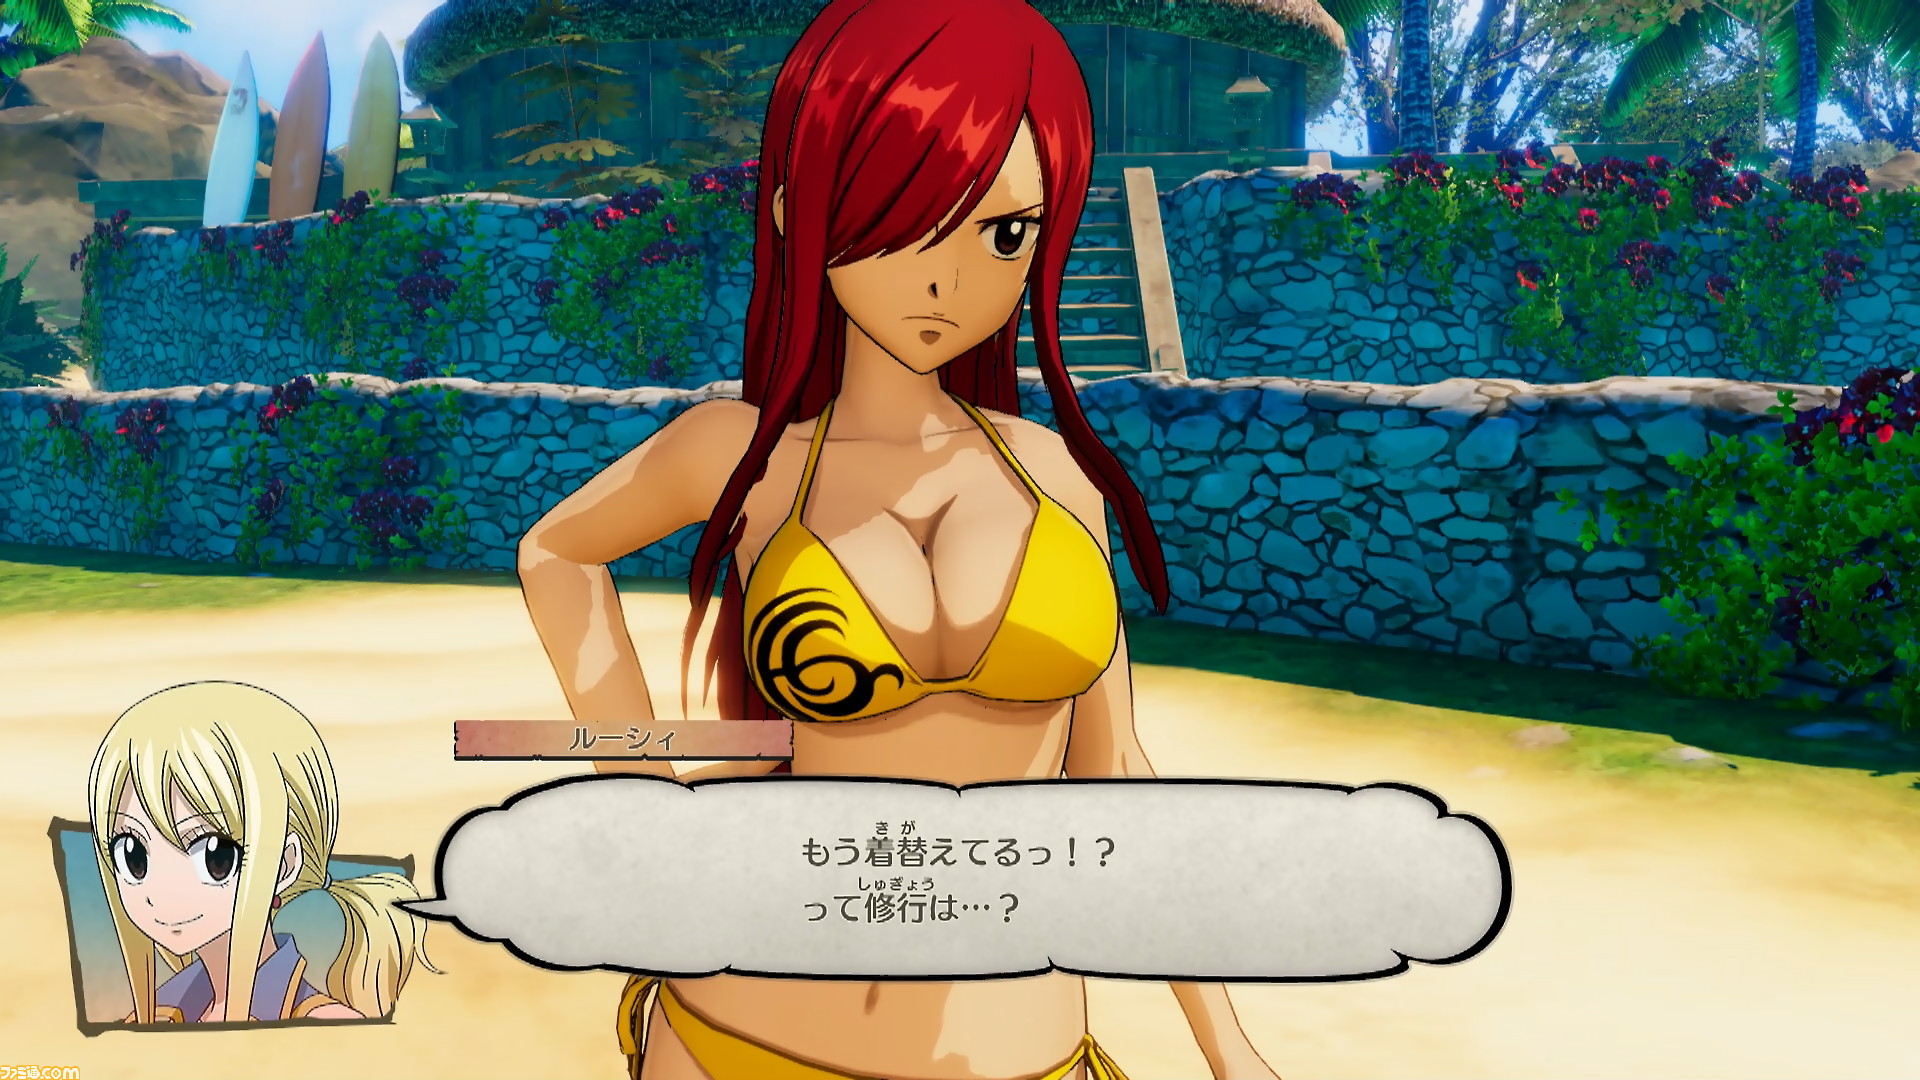 Here’s the latest set of screenshots for Fairy Tail. 